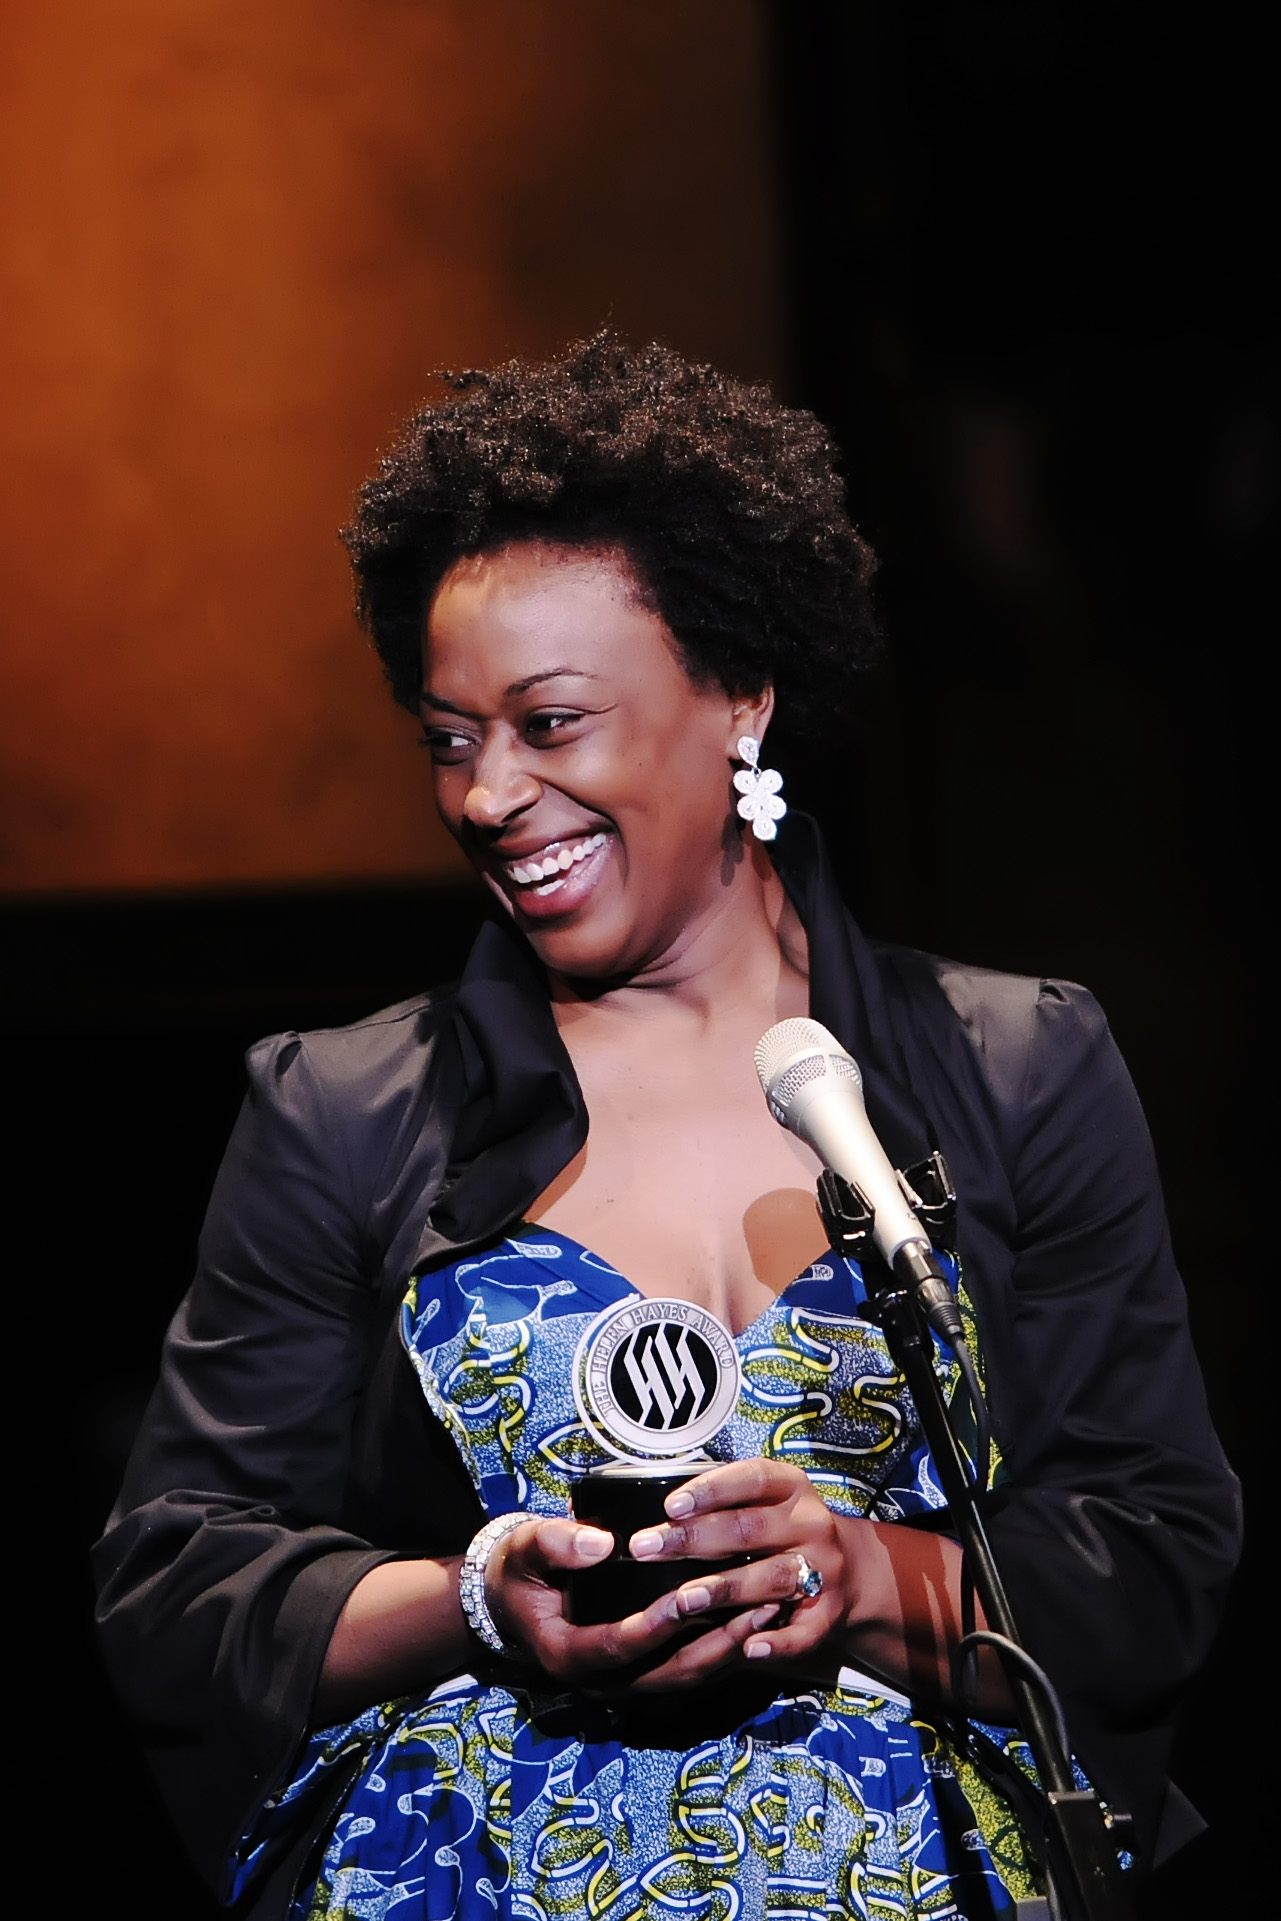 Rose accepts her award at the 2011 Helen Hayes Award Ceremony. Erika won an award for Outsanding Lead Actress.